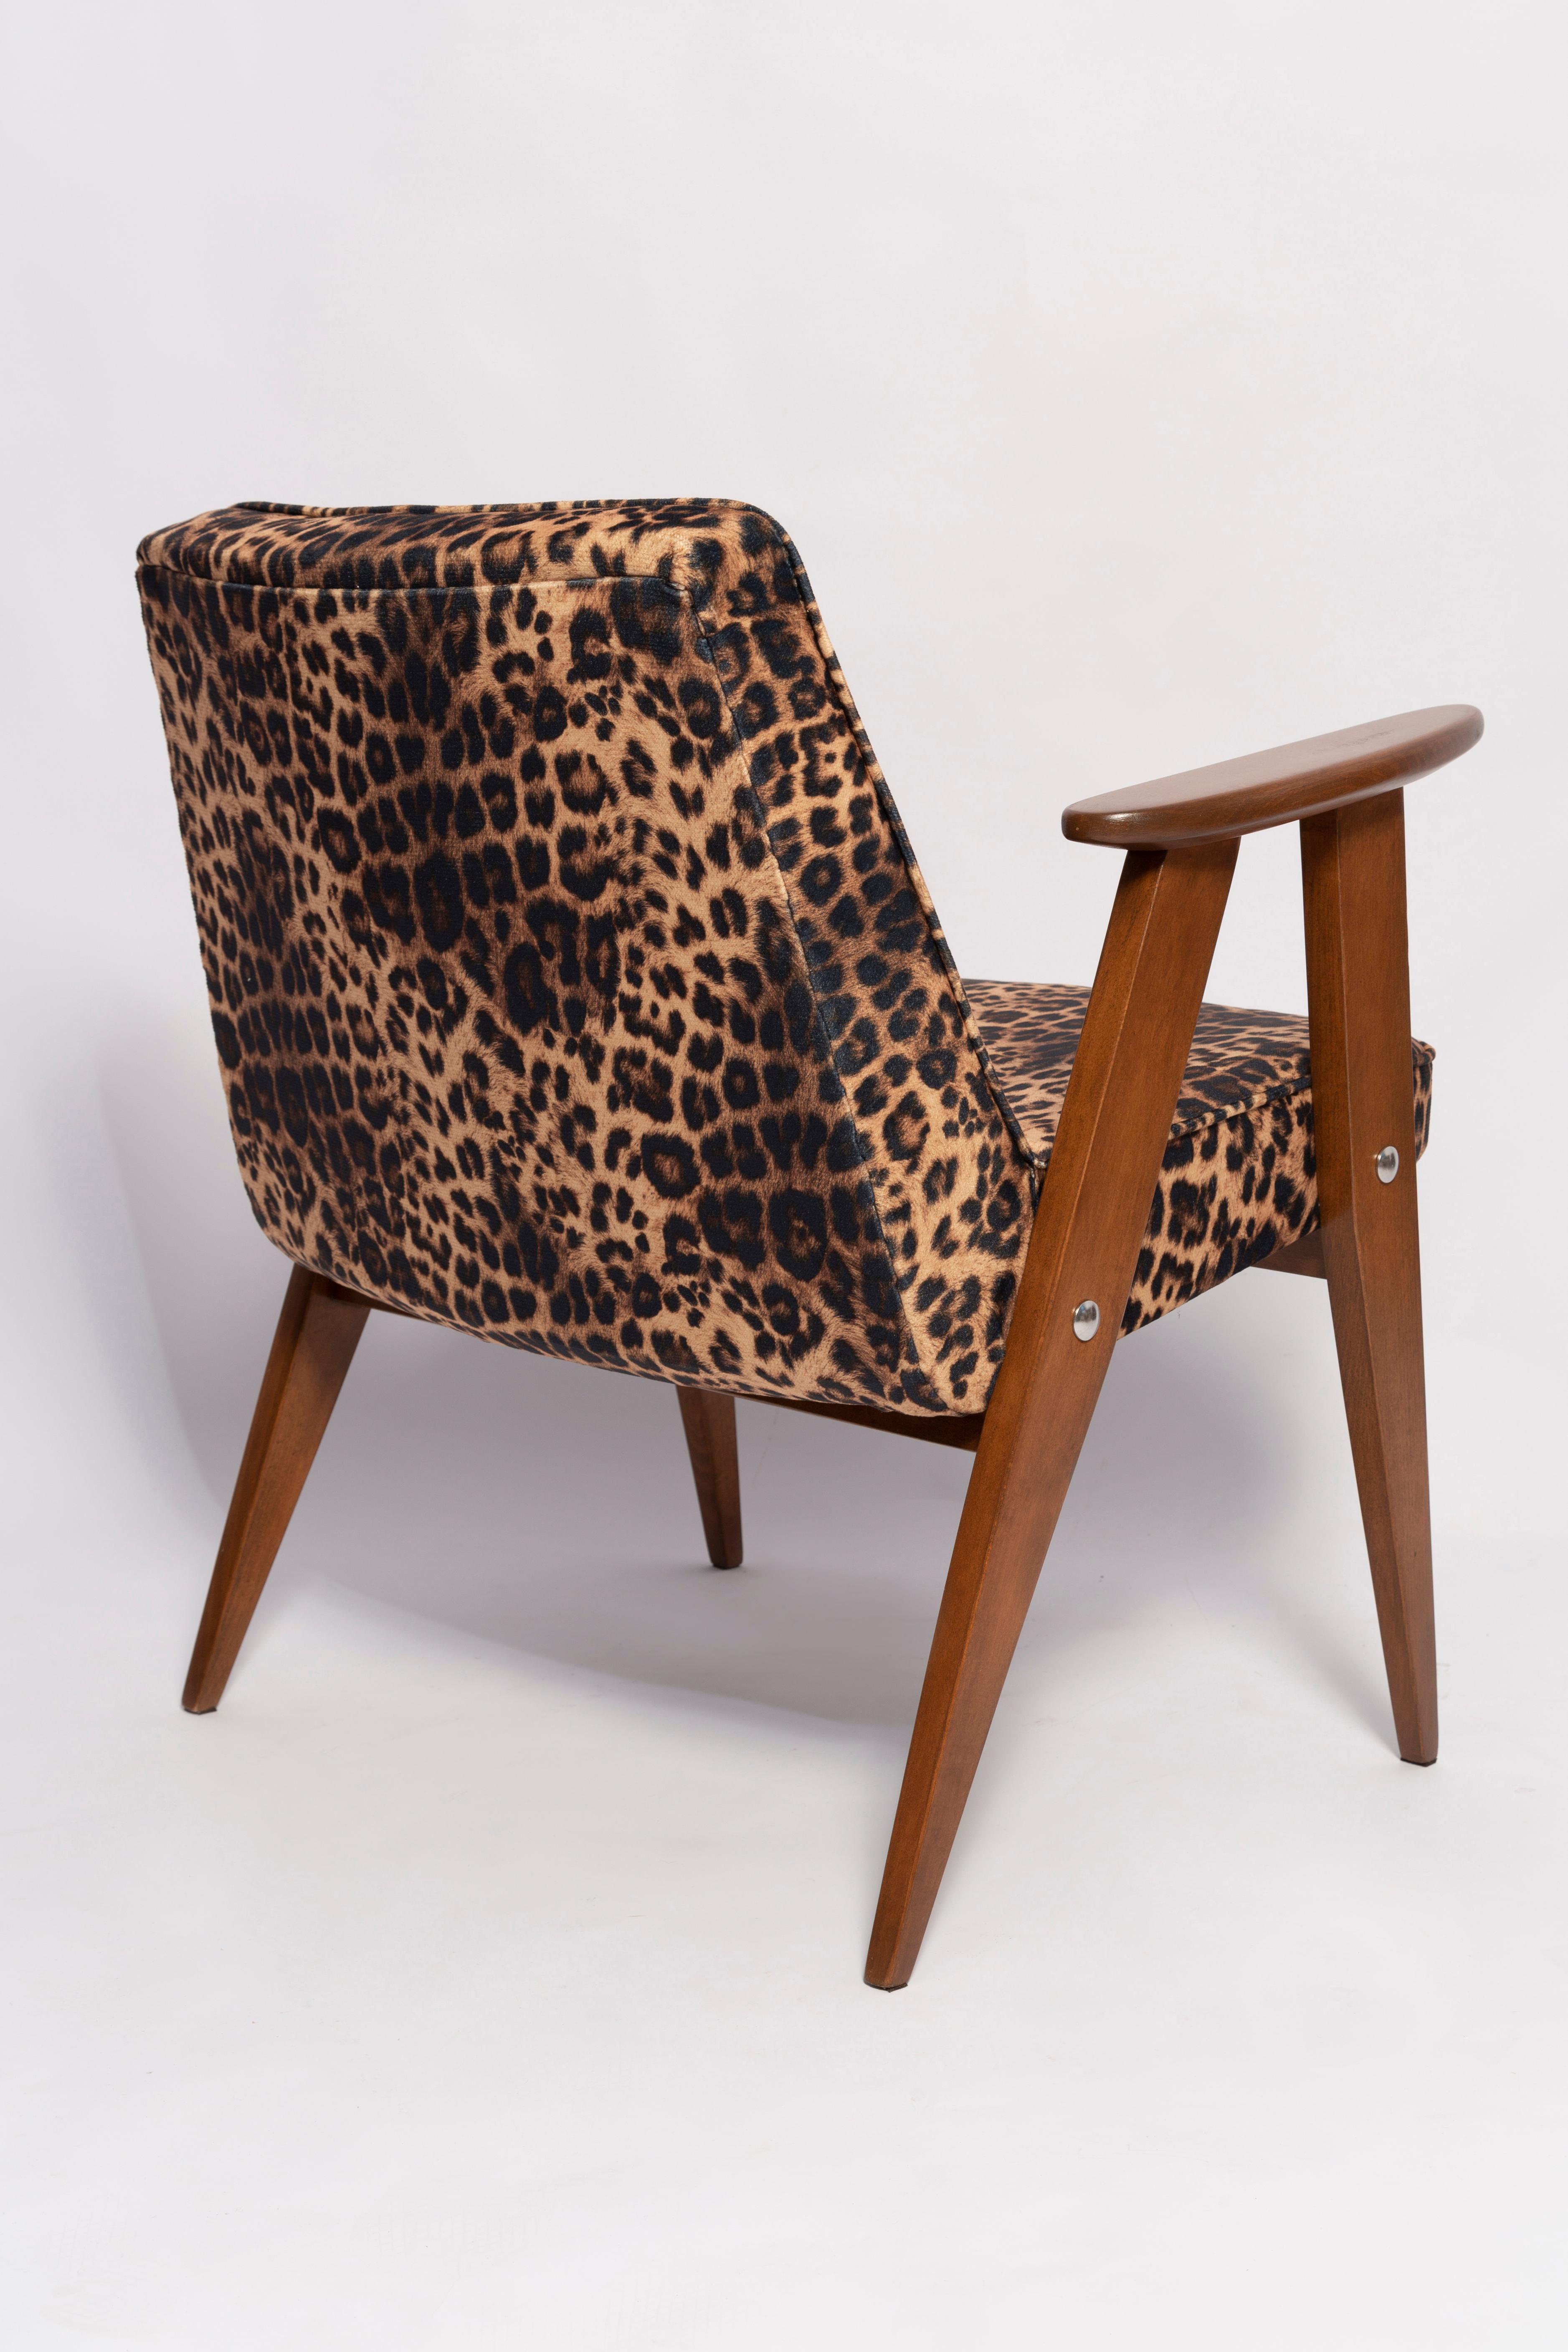 Two Mid Century 366 Armchairs in Leopard Print Velvet, Jozef Chierowski, 1960s For Sale 3